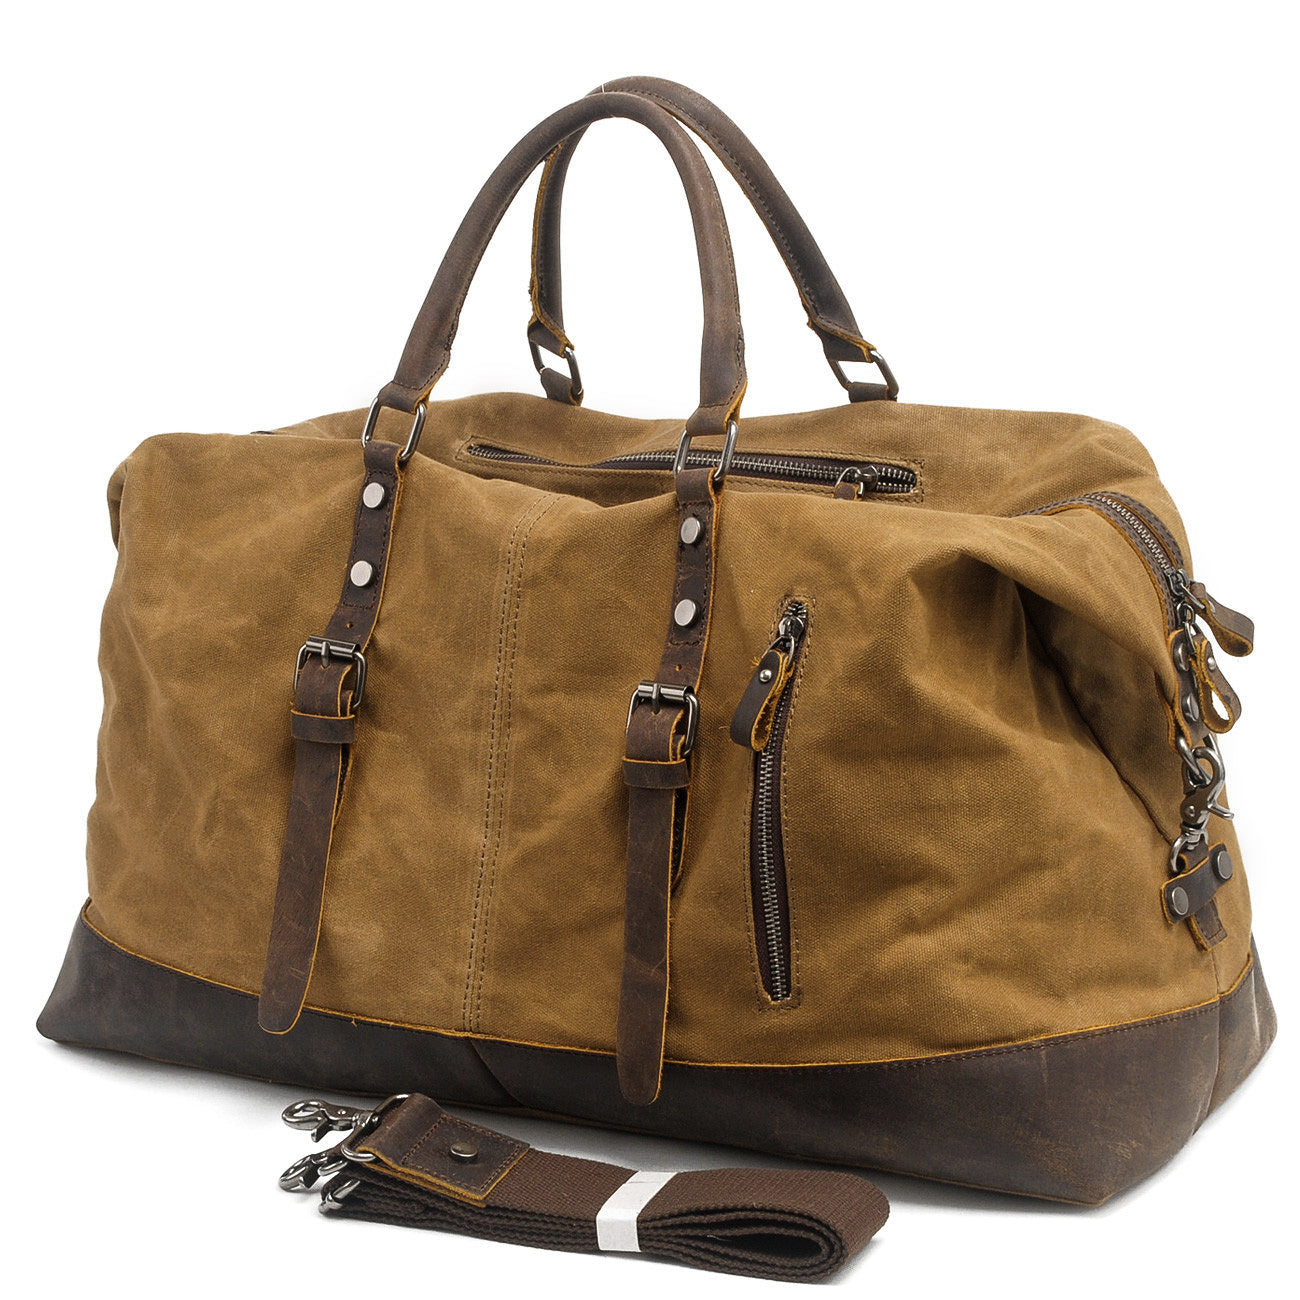 expandable cotton canvas duffle bag for men and women with sturdy zippers, removable shoulder strap and solid brass hardware